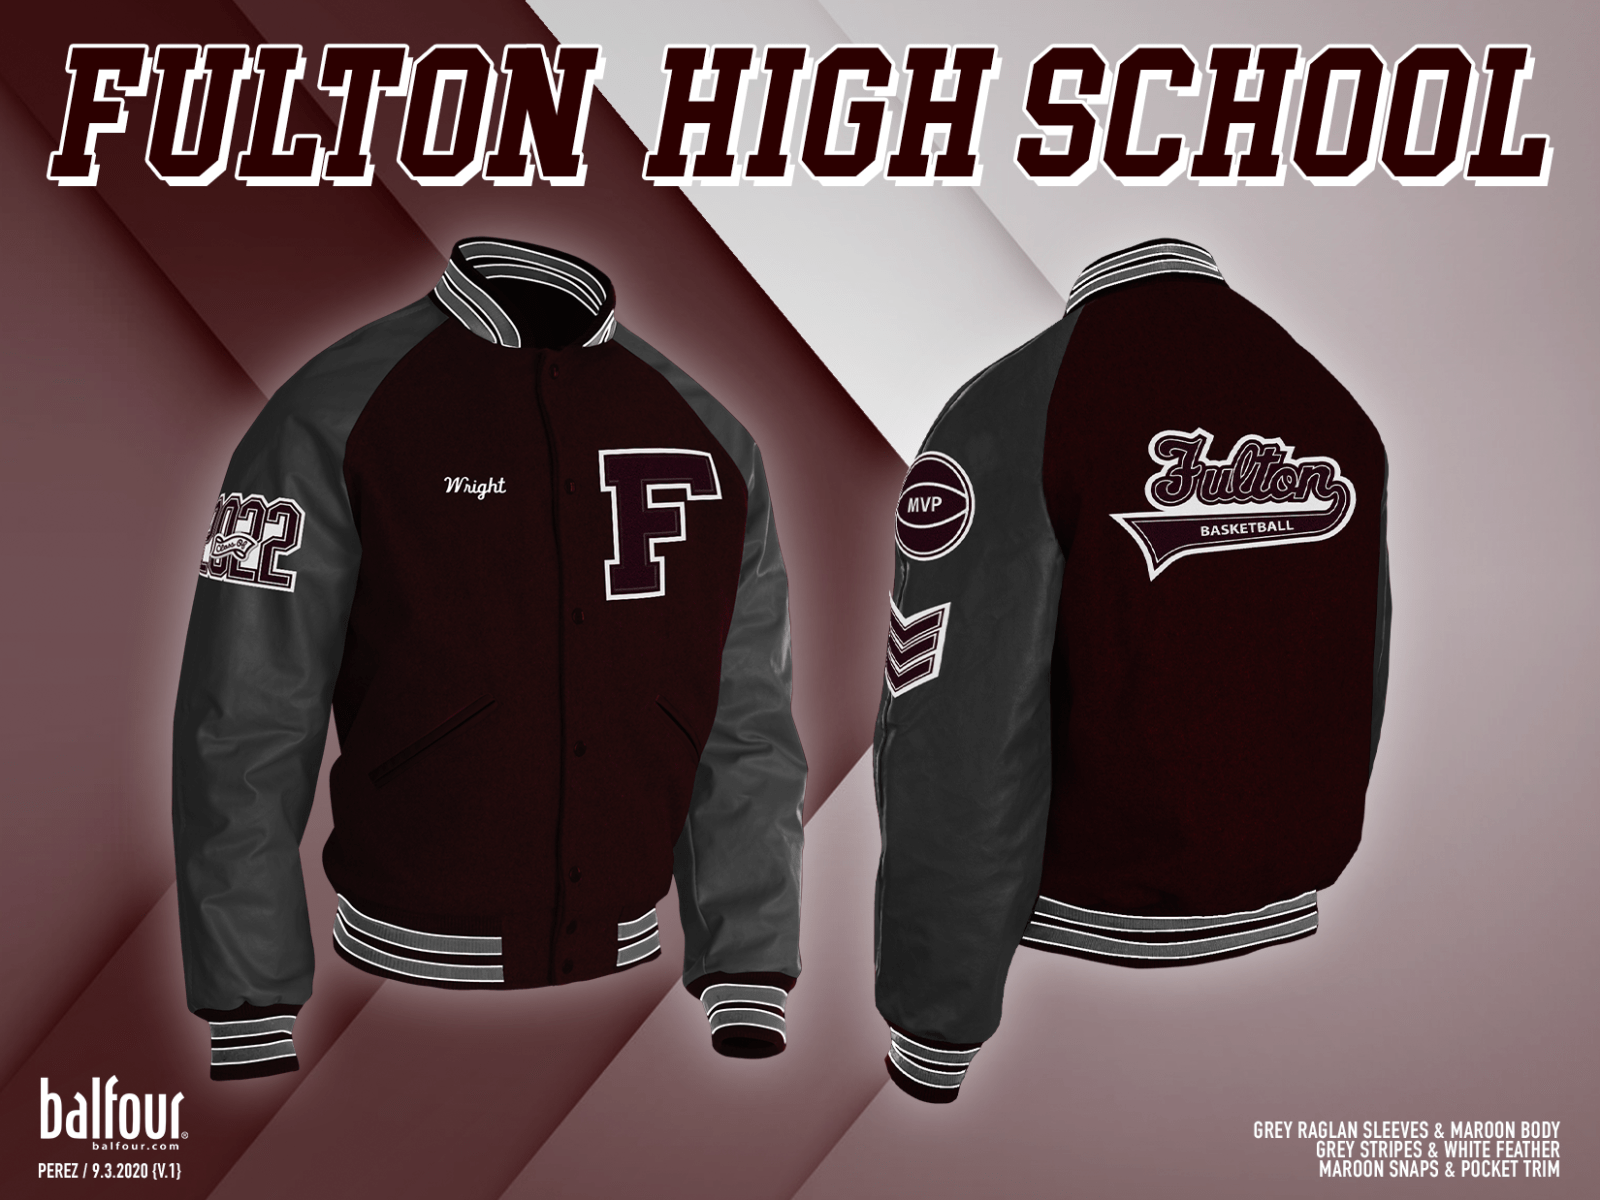 High School Letter Jackets for Athletes, Bands and Club | BalfourGA ...